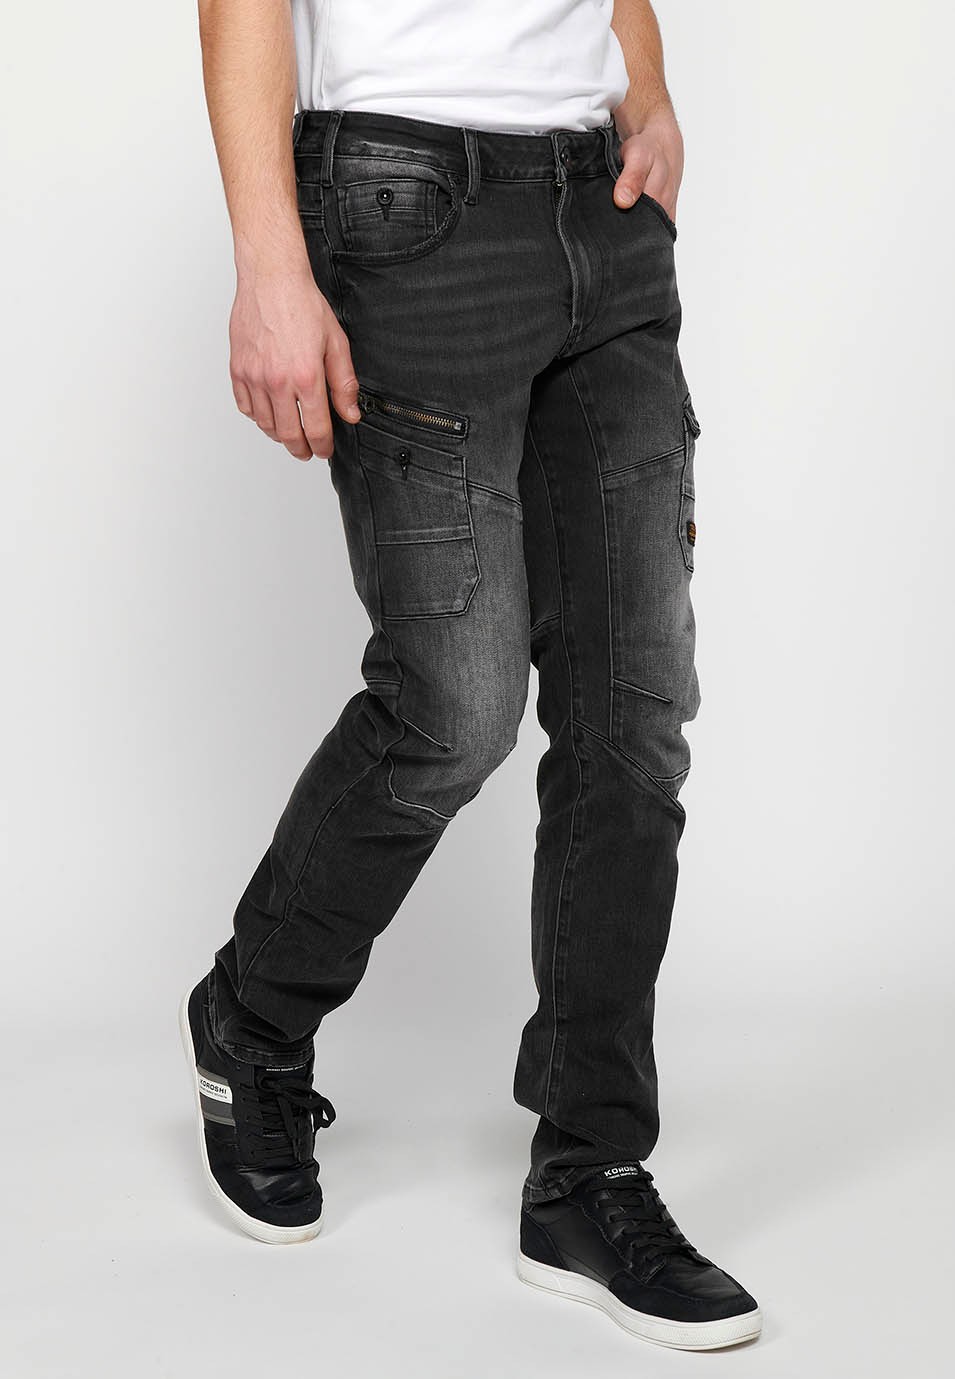 Long denim pants with front closure with zipper and button and pockets, two sides in Black for Men 2